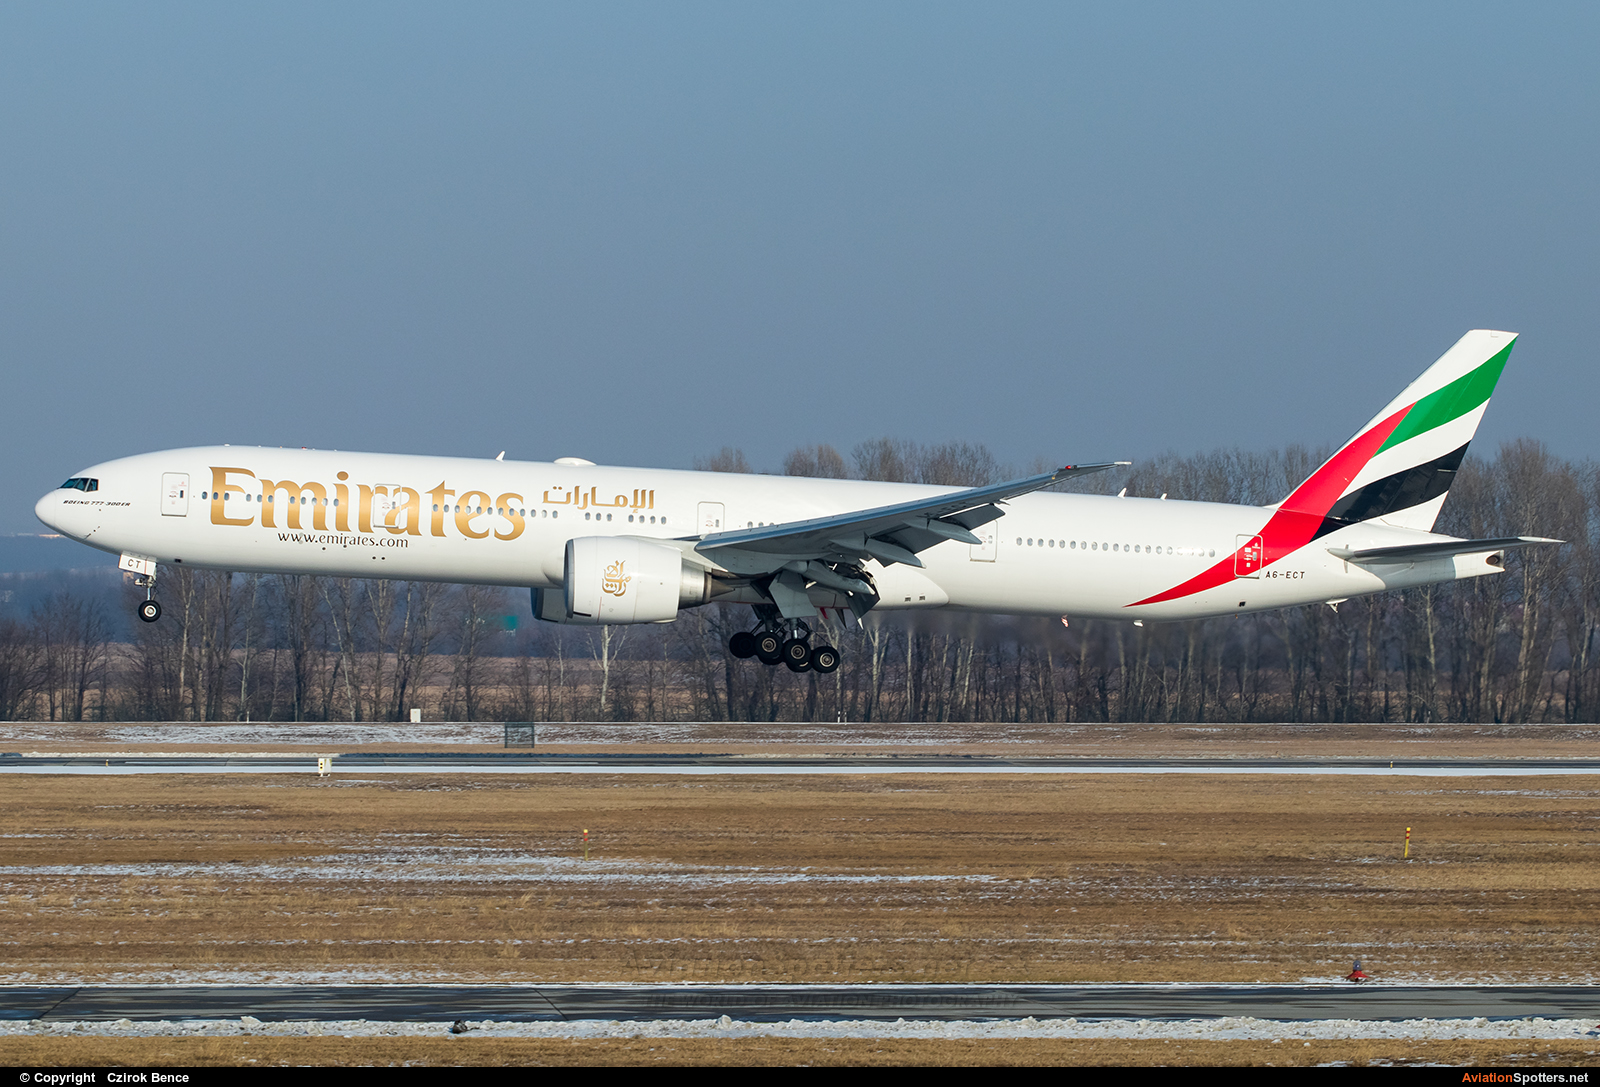 Emirates Airlines  -  777-300ER  (A6-ECT) By Czirok Bence (Orosmet)